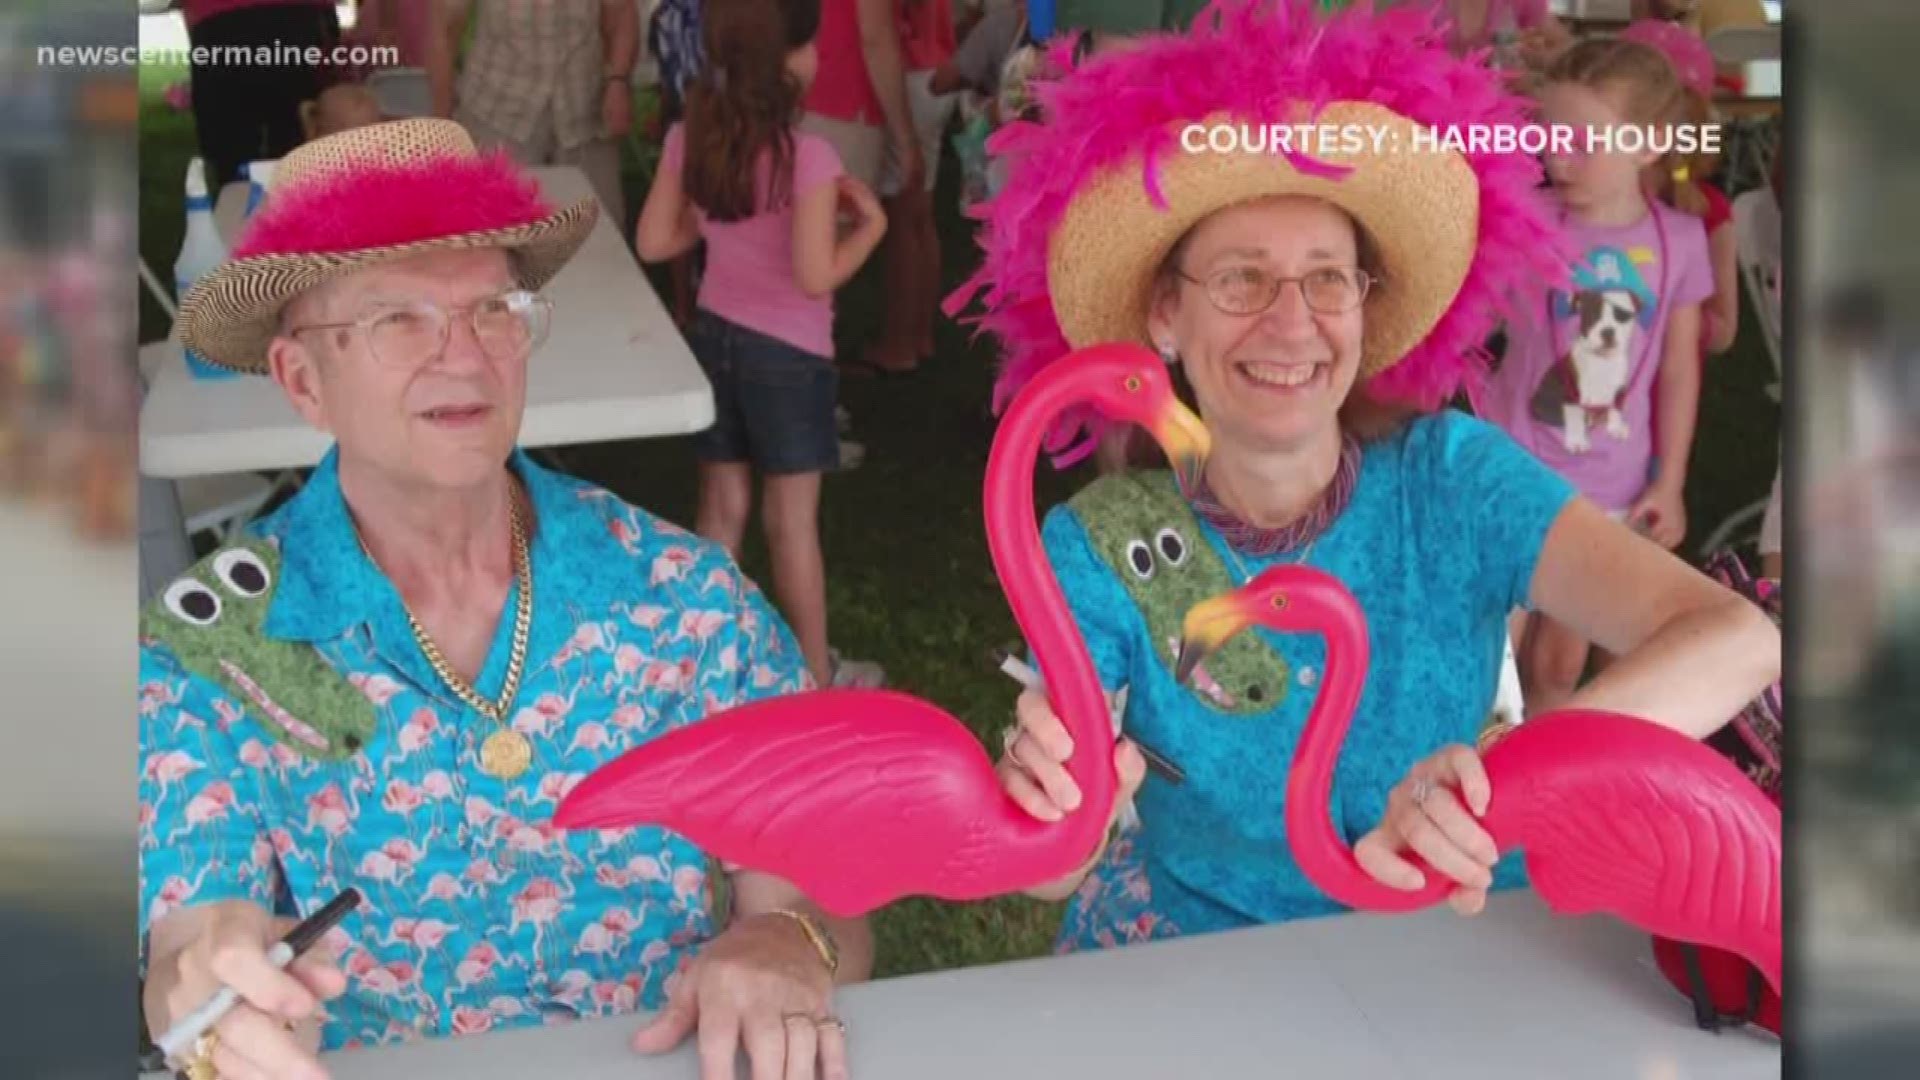 Don't miss the Flamingo Festival in Southwest Harbor on the weekend of July 13 & 14. There will be a parade, lobster bake, Flamingo run, and cocktail parties just to list a few of the events.